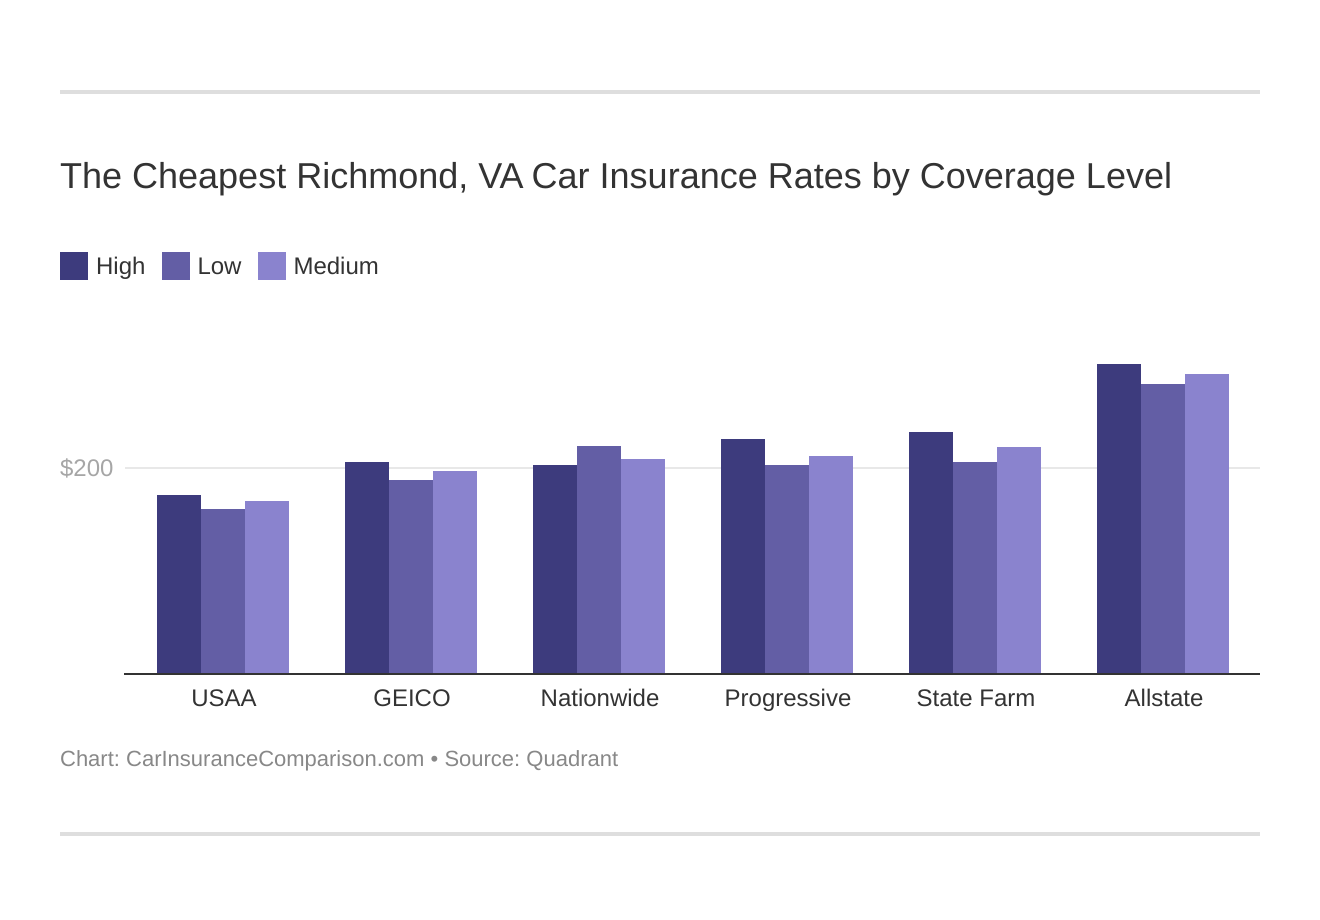 The Cheapest Richmond, VA Car Insurance Rates by Coverage Level